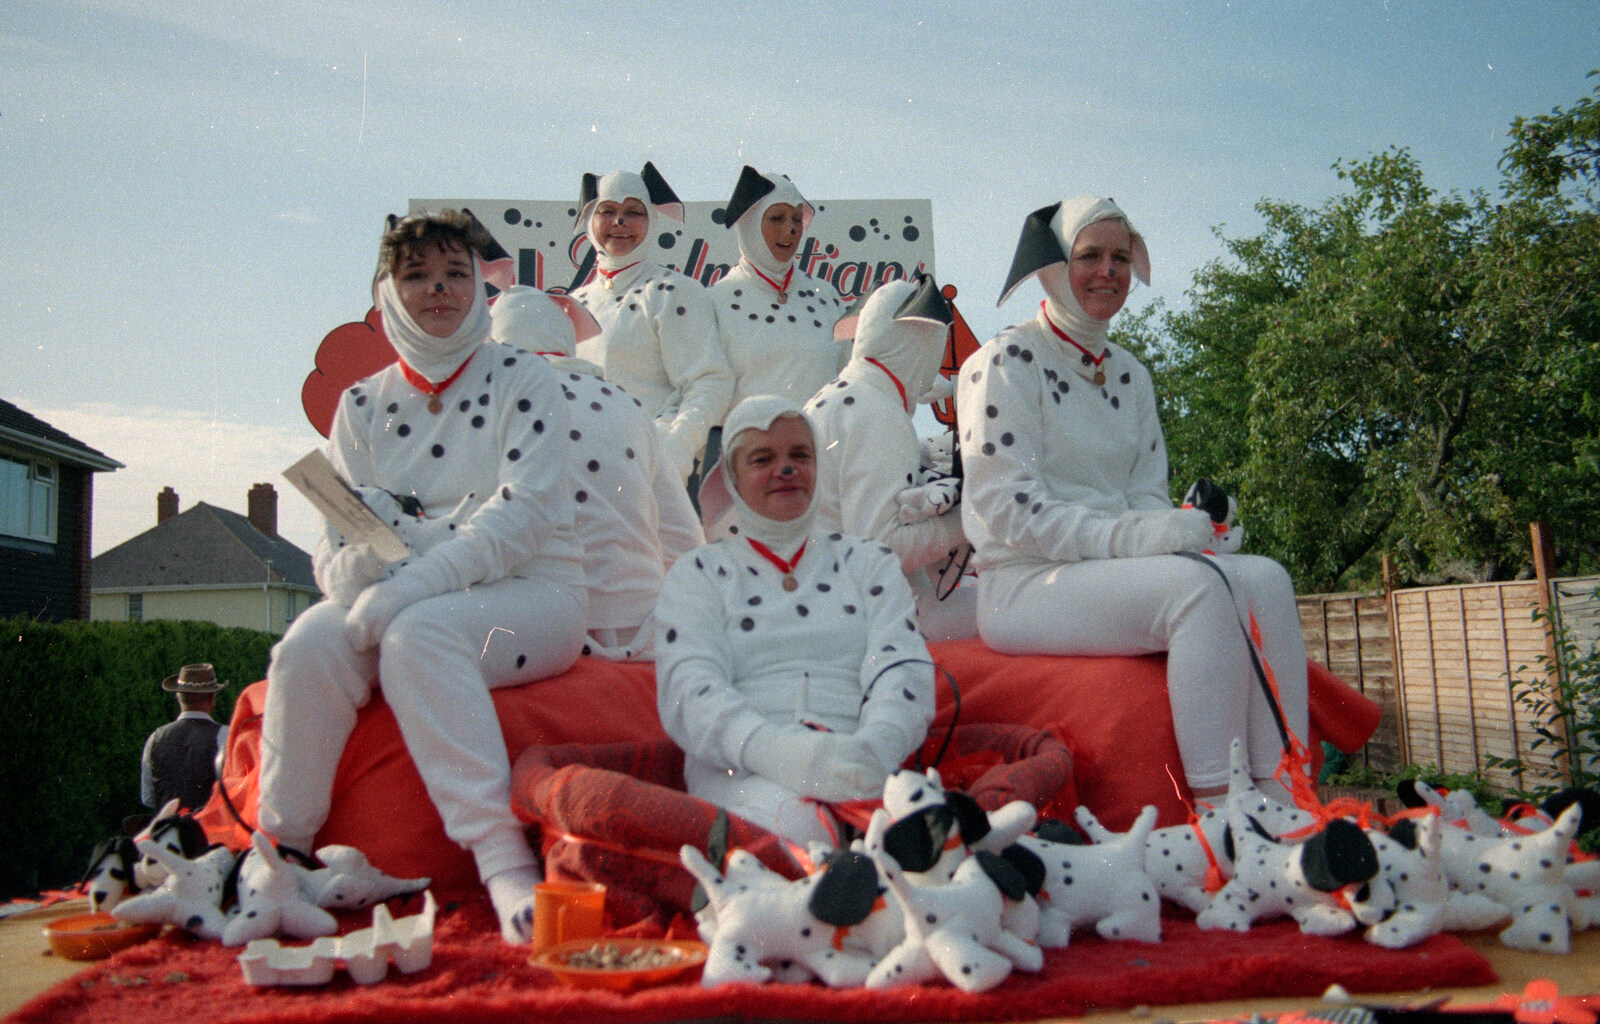 A bunch of dalmatians from The Lymington Carnival, Hampshire - 17th June 1985